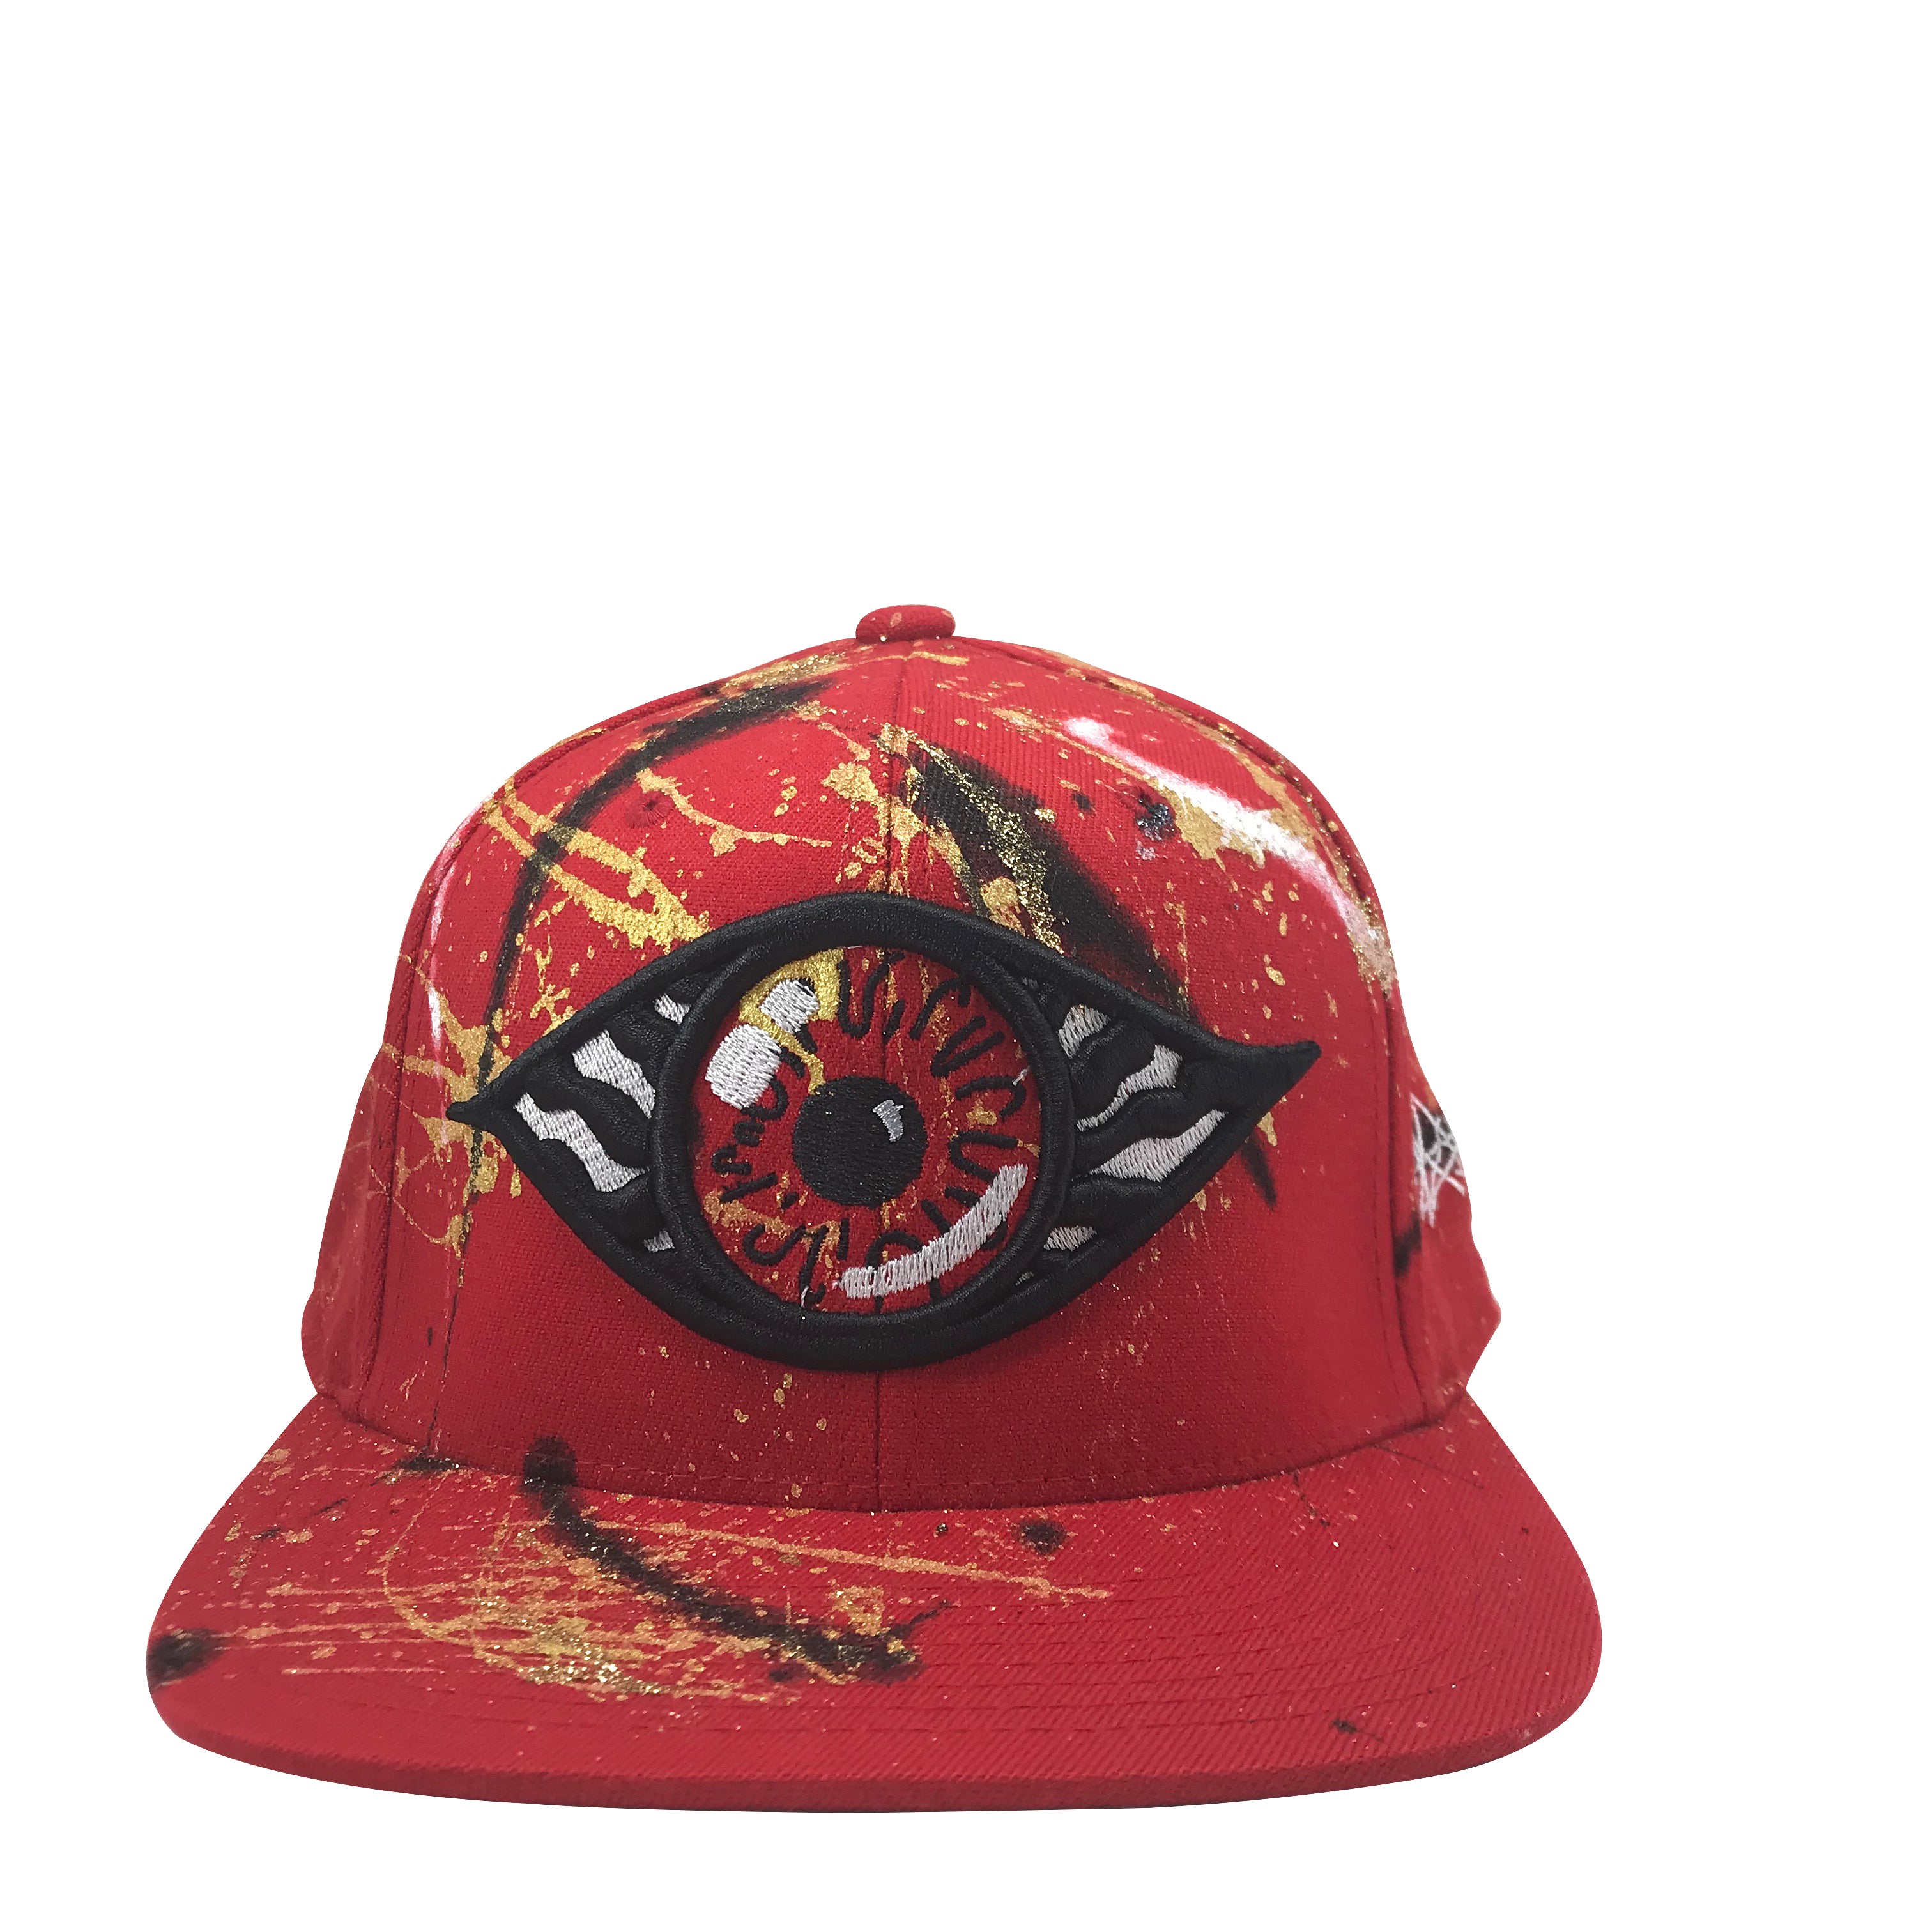 Hat - Unique hand painted / Red- B&W- Gold